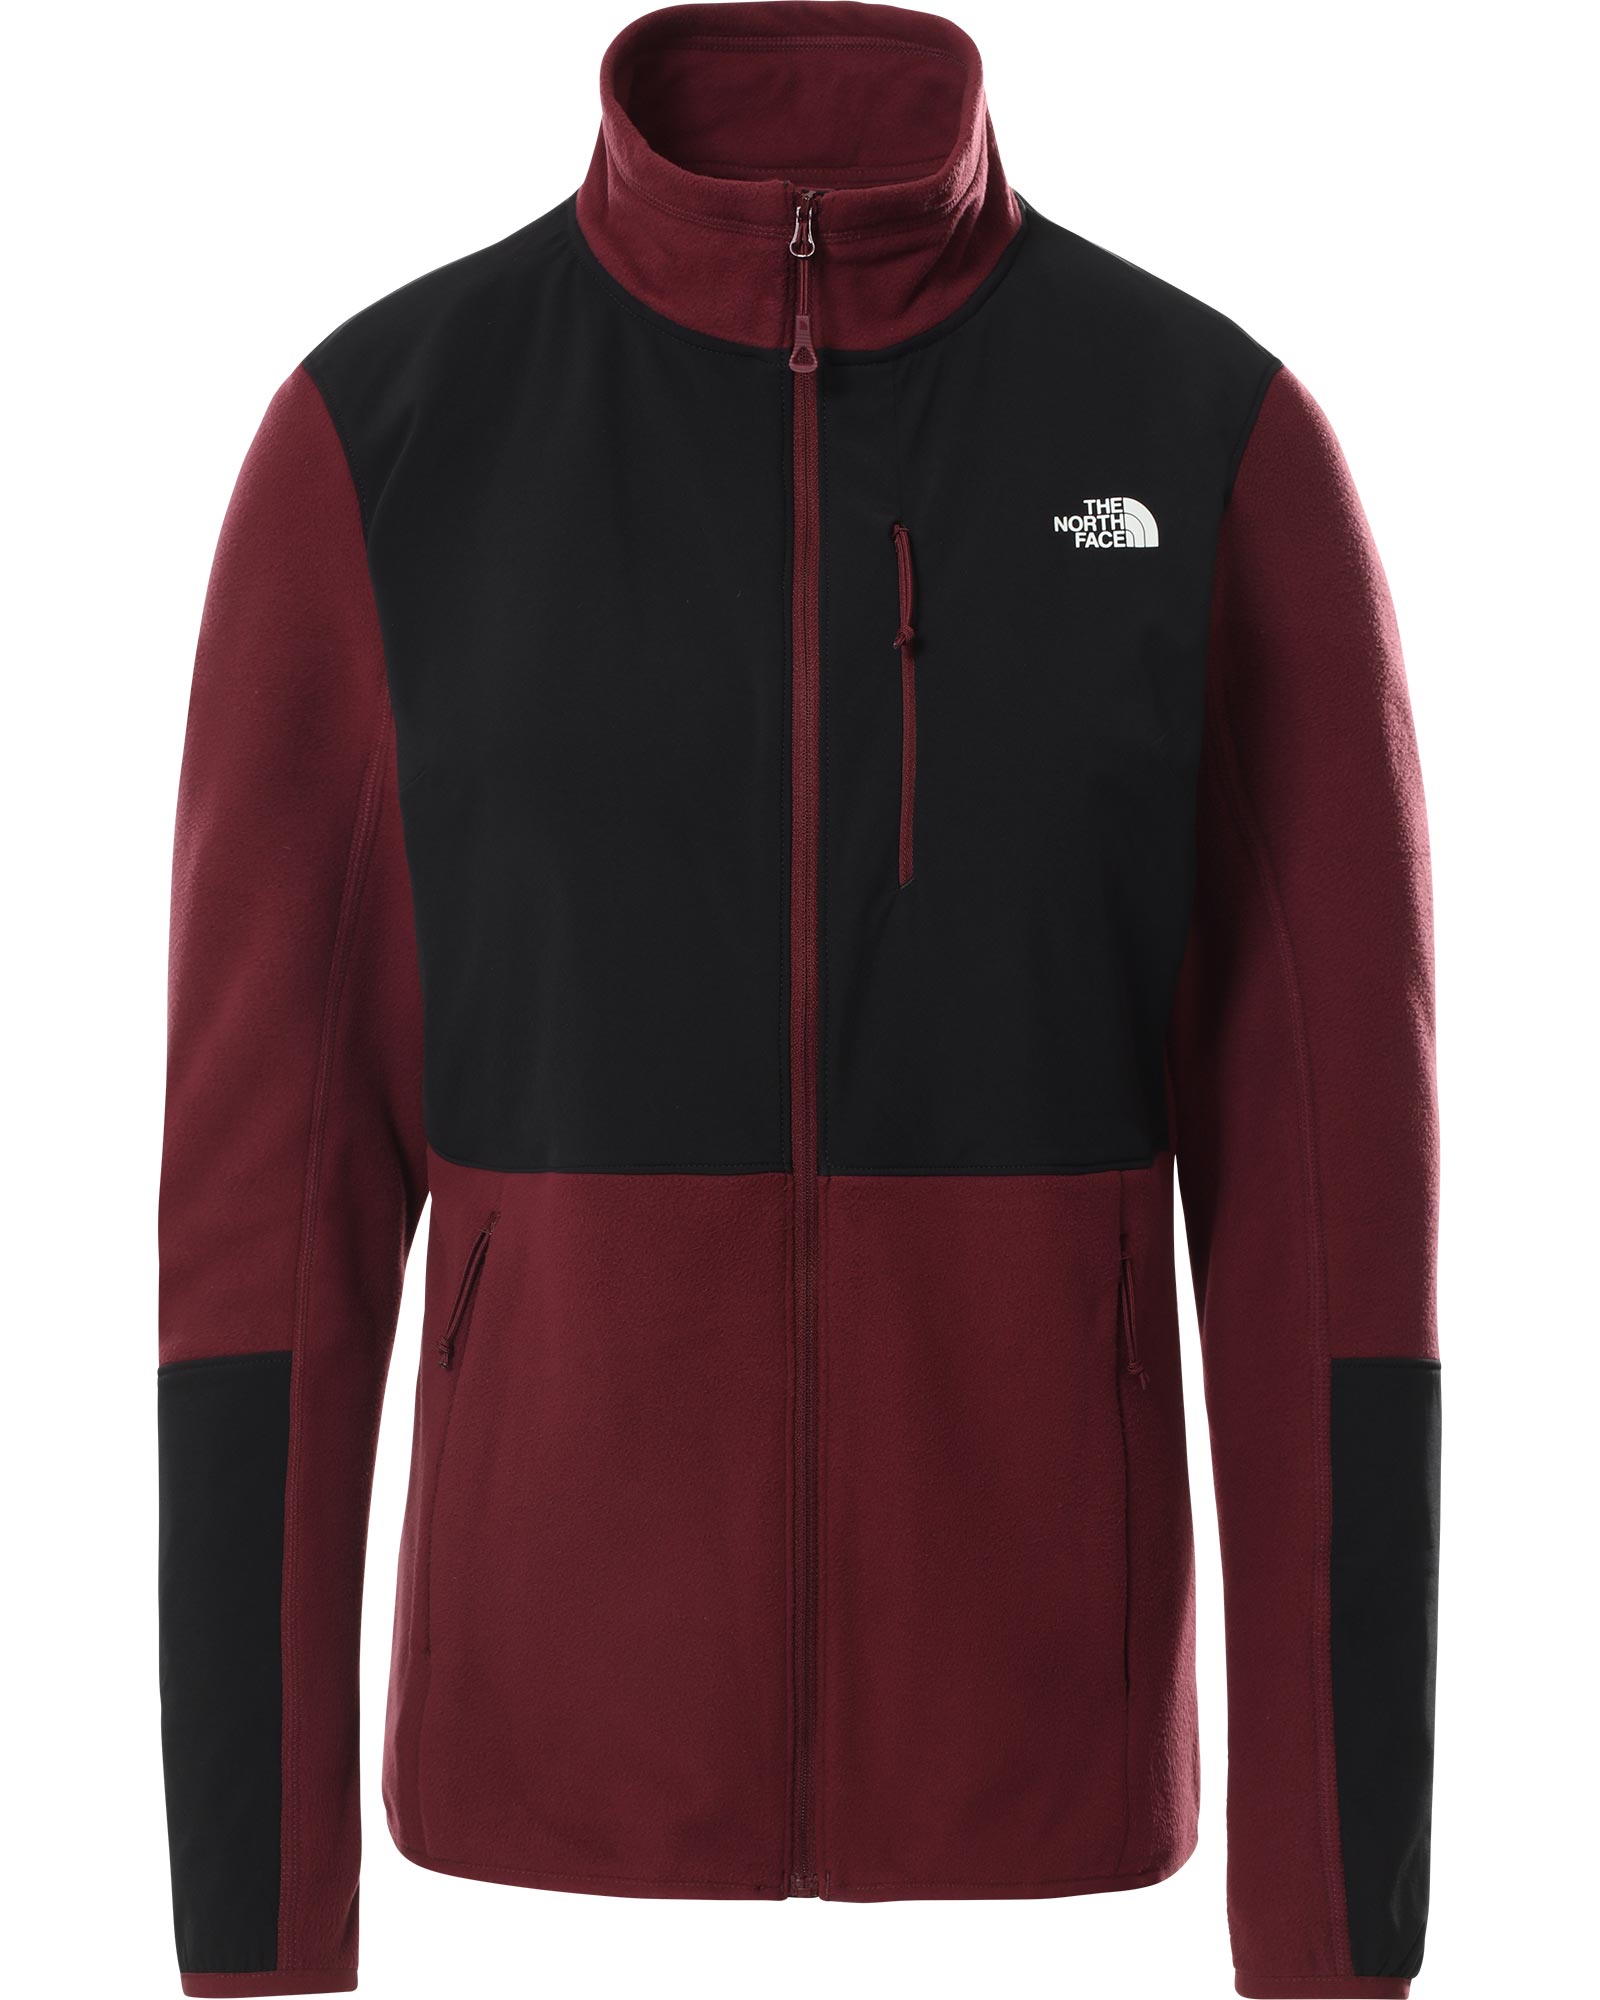 The North Face Diablo Women’s Mid Layer Jacket - Regal Red S